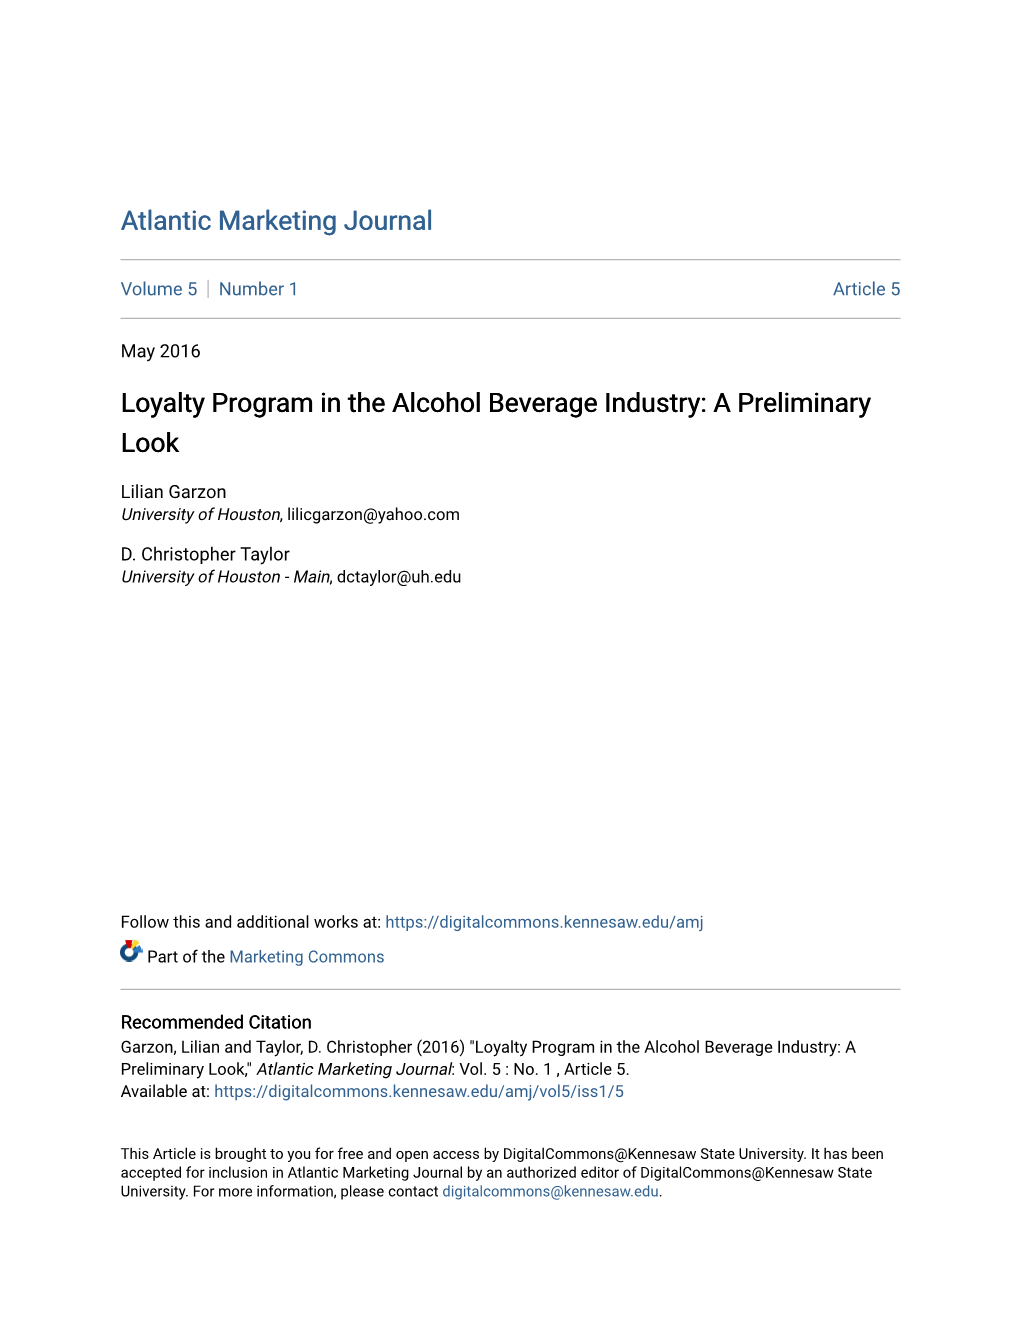 Loyalty Program in the Alcohol Beverage Industry: a Preliminary Look